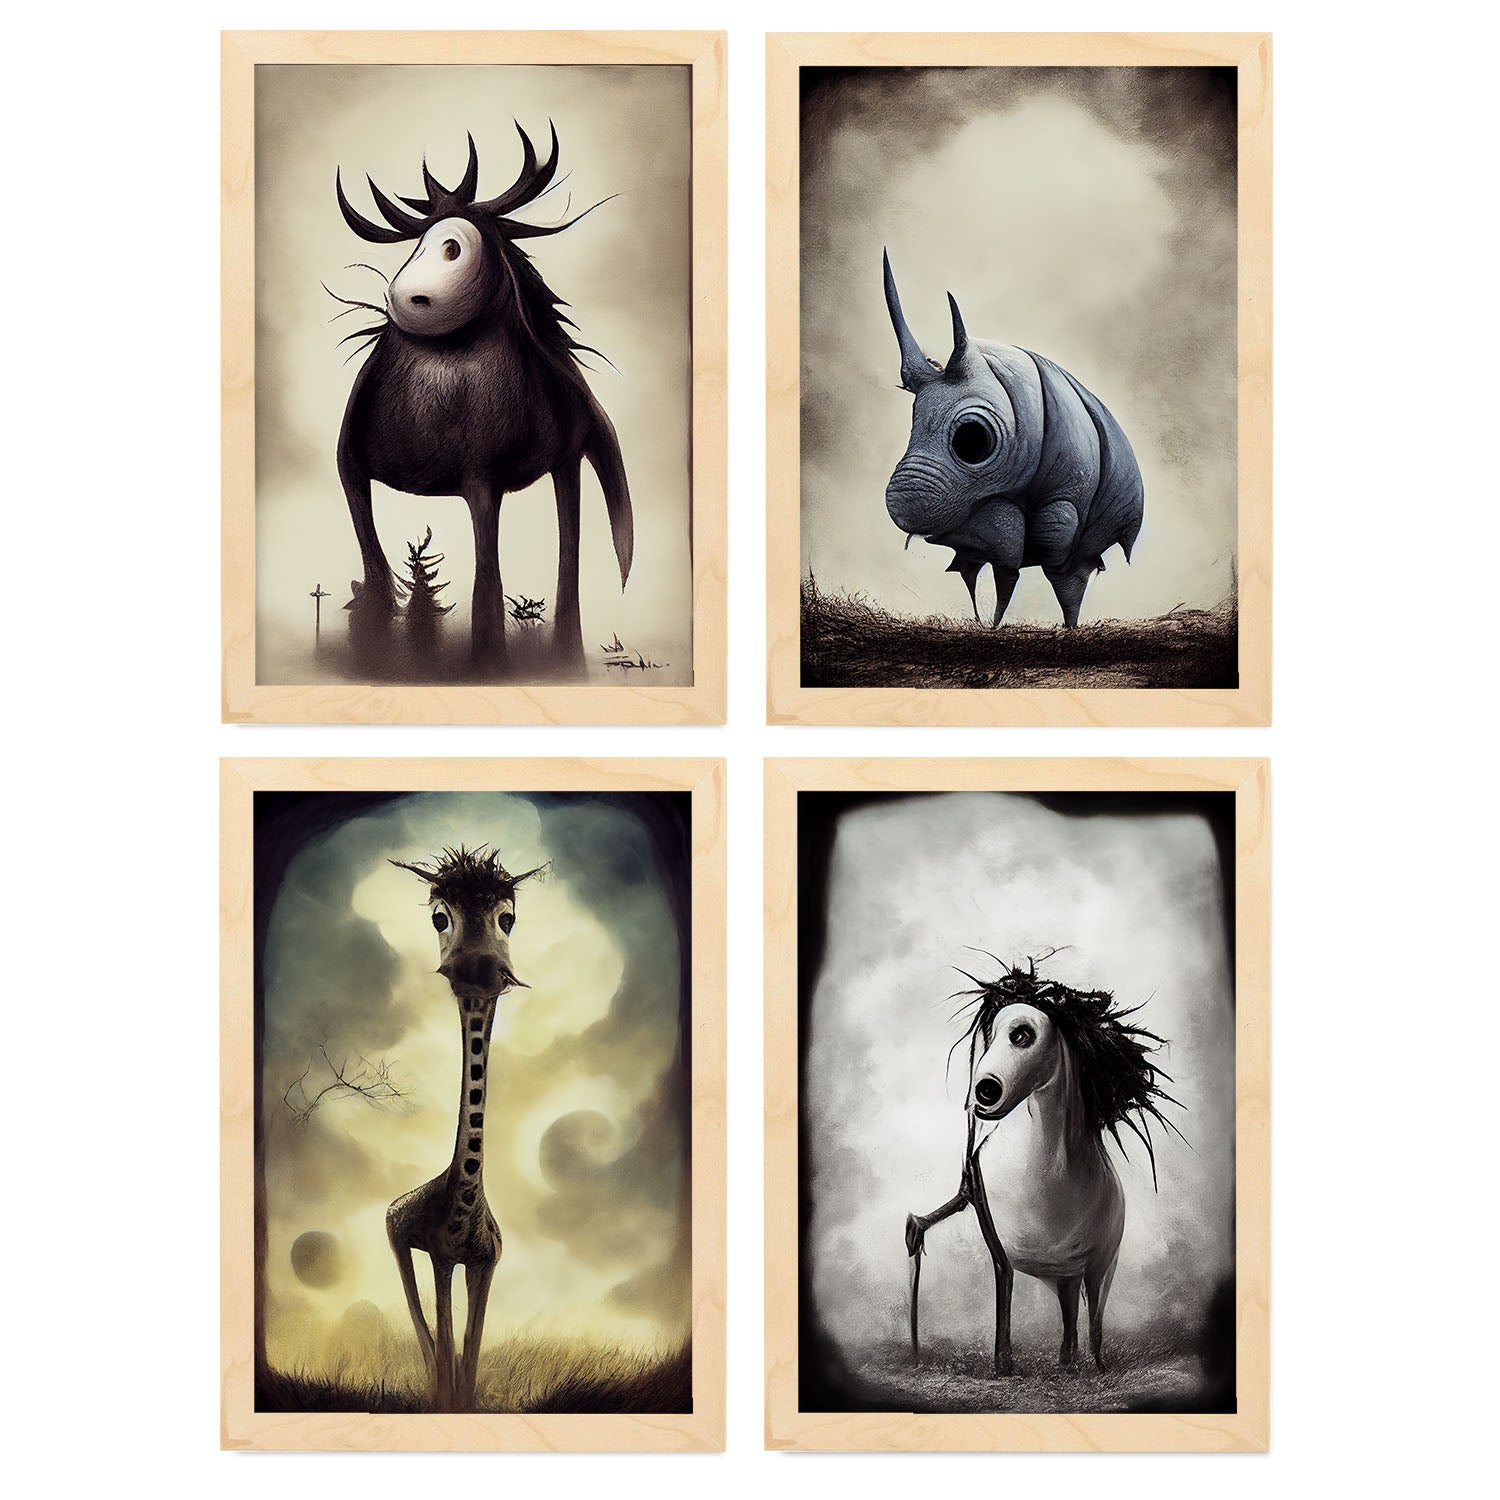 Burton style Animal Illustrations and Posters inspired by Burton's Dark and Goth art Interior Design and Decoration Sets Collection 1-Artwork-Nacnic-A4-Marco Madera clara-Nacnic Estudio SL